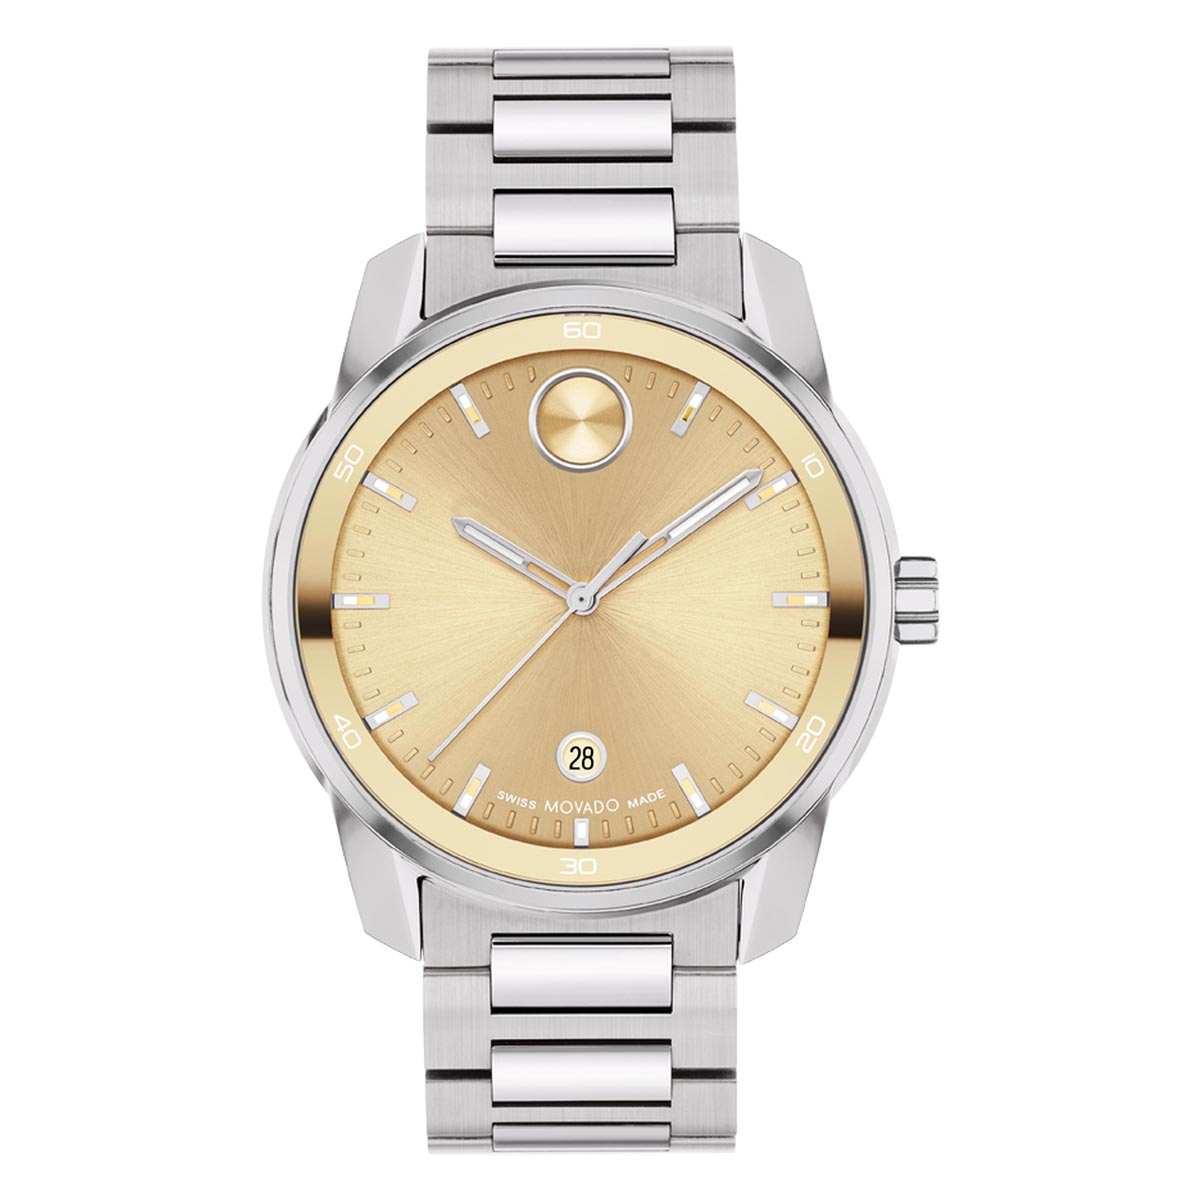 Movado Bold Verso Men's Watch with Gold Tone Dial and Stainless Steel Bracelet (quartz movement)